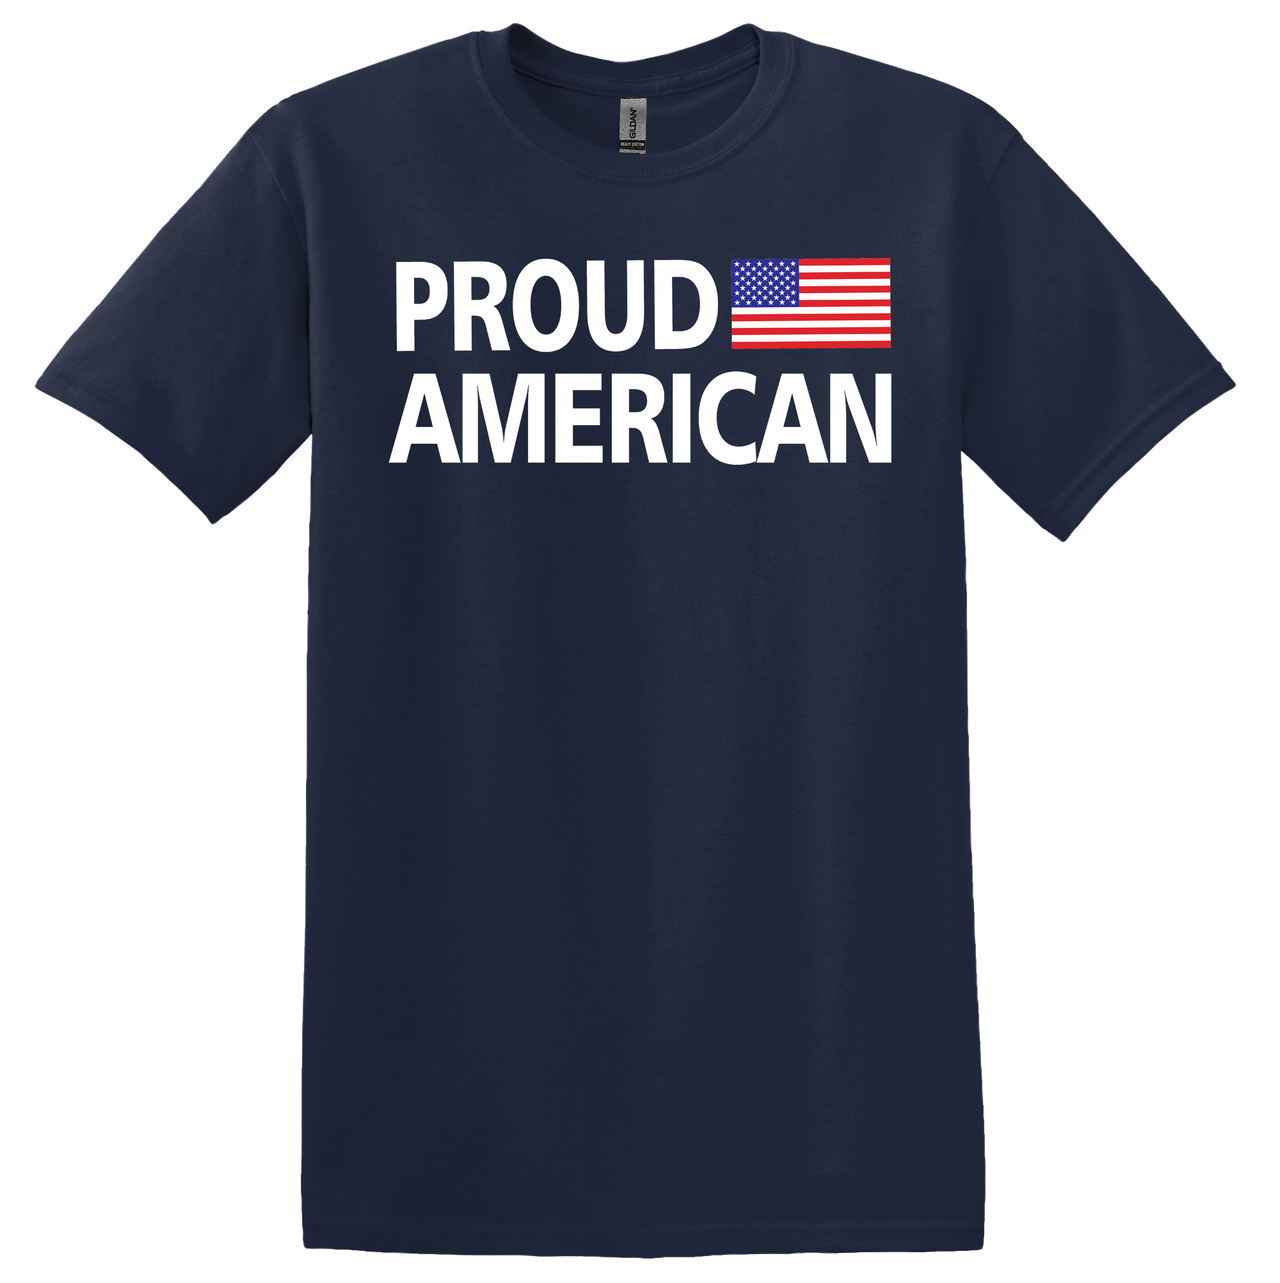 PROUD AMERICAN with USA Flag on T-Shirt